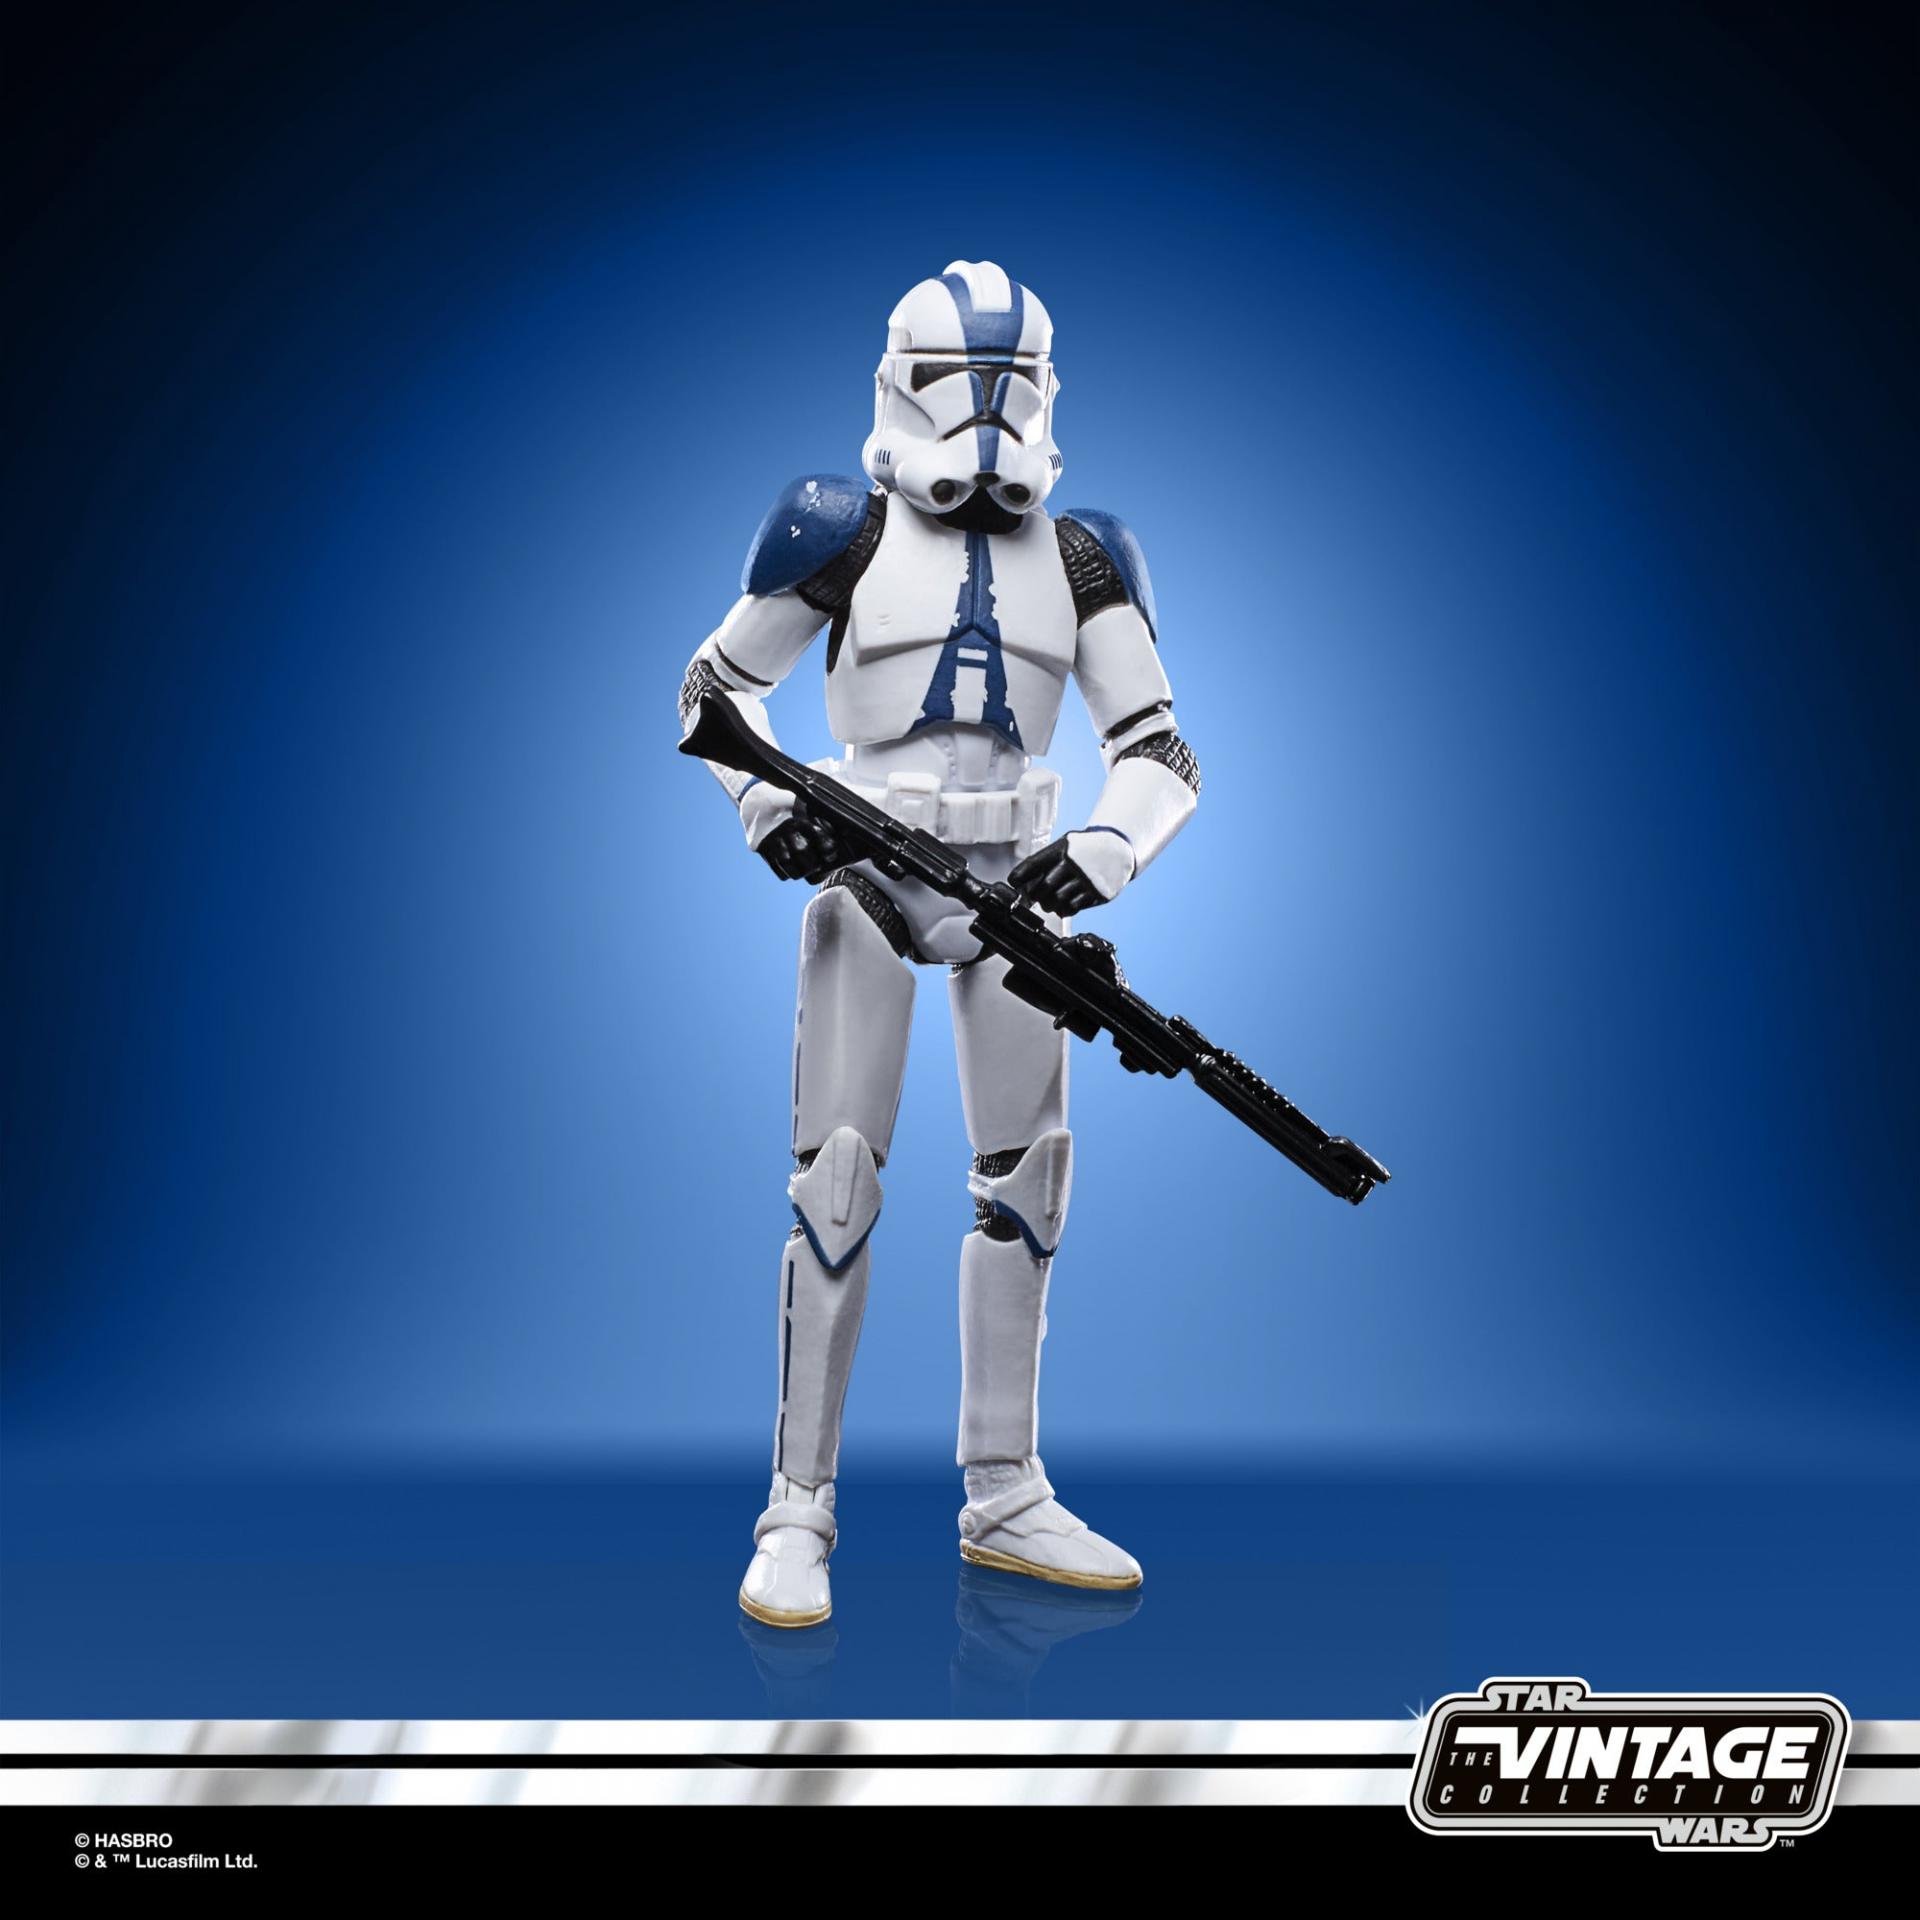 Star wars the vintage collection clone trooper 501st legion jawascave